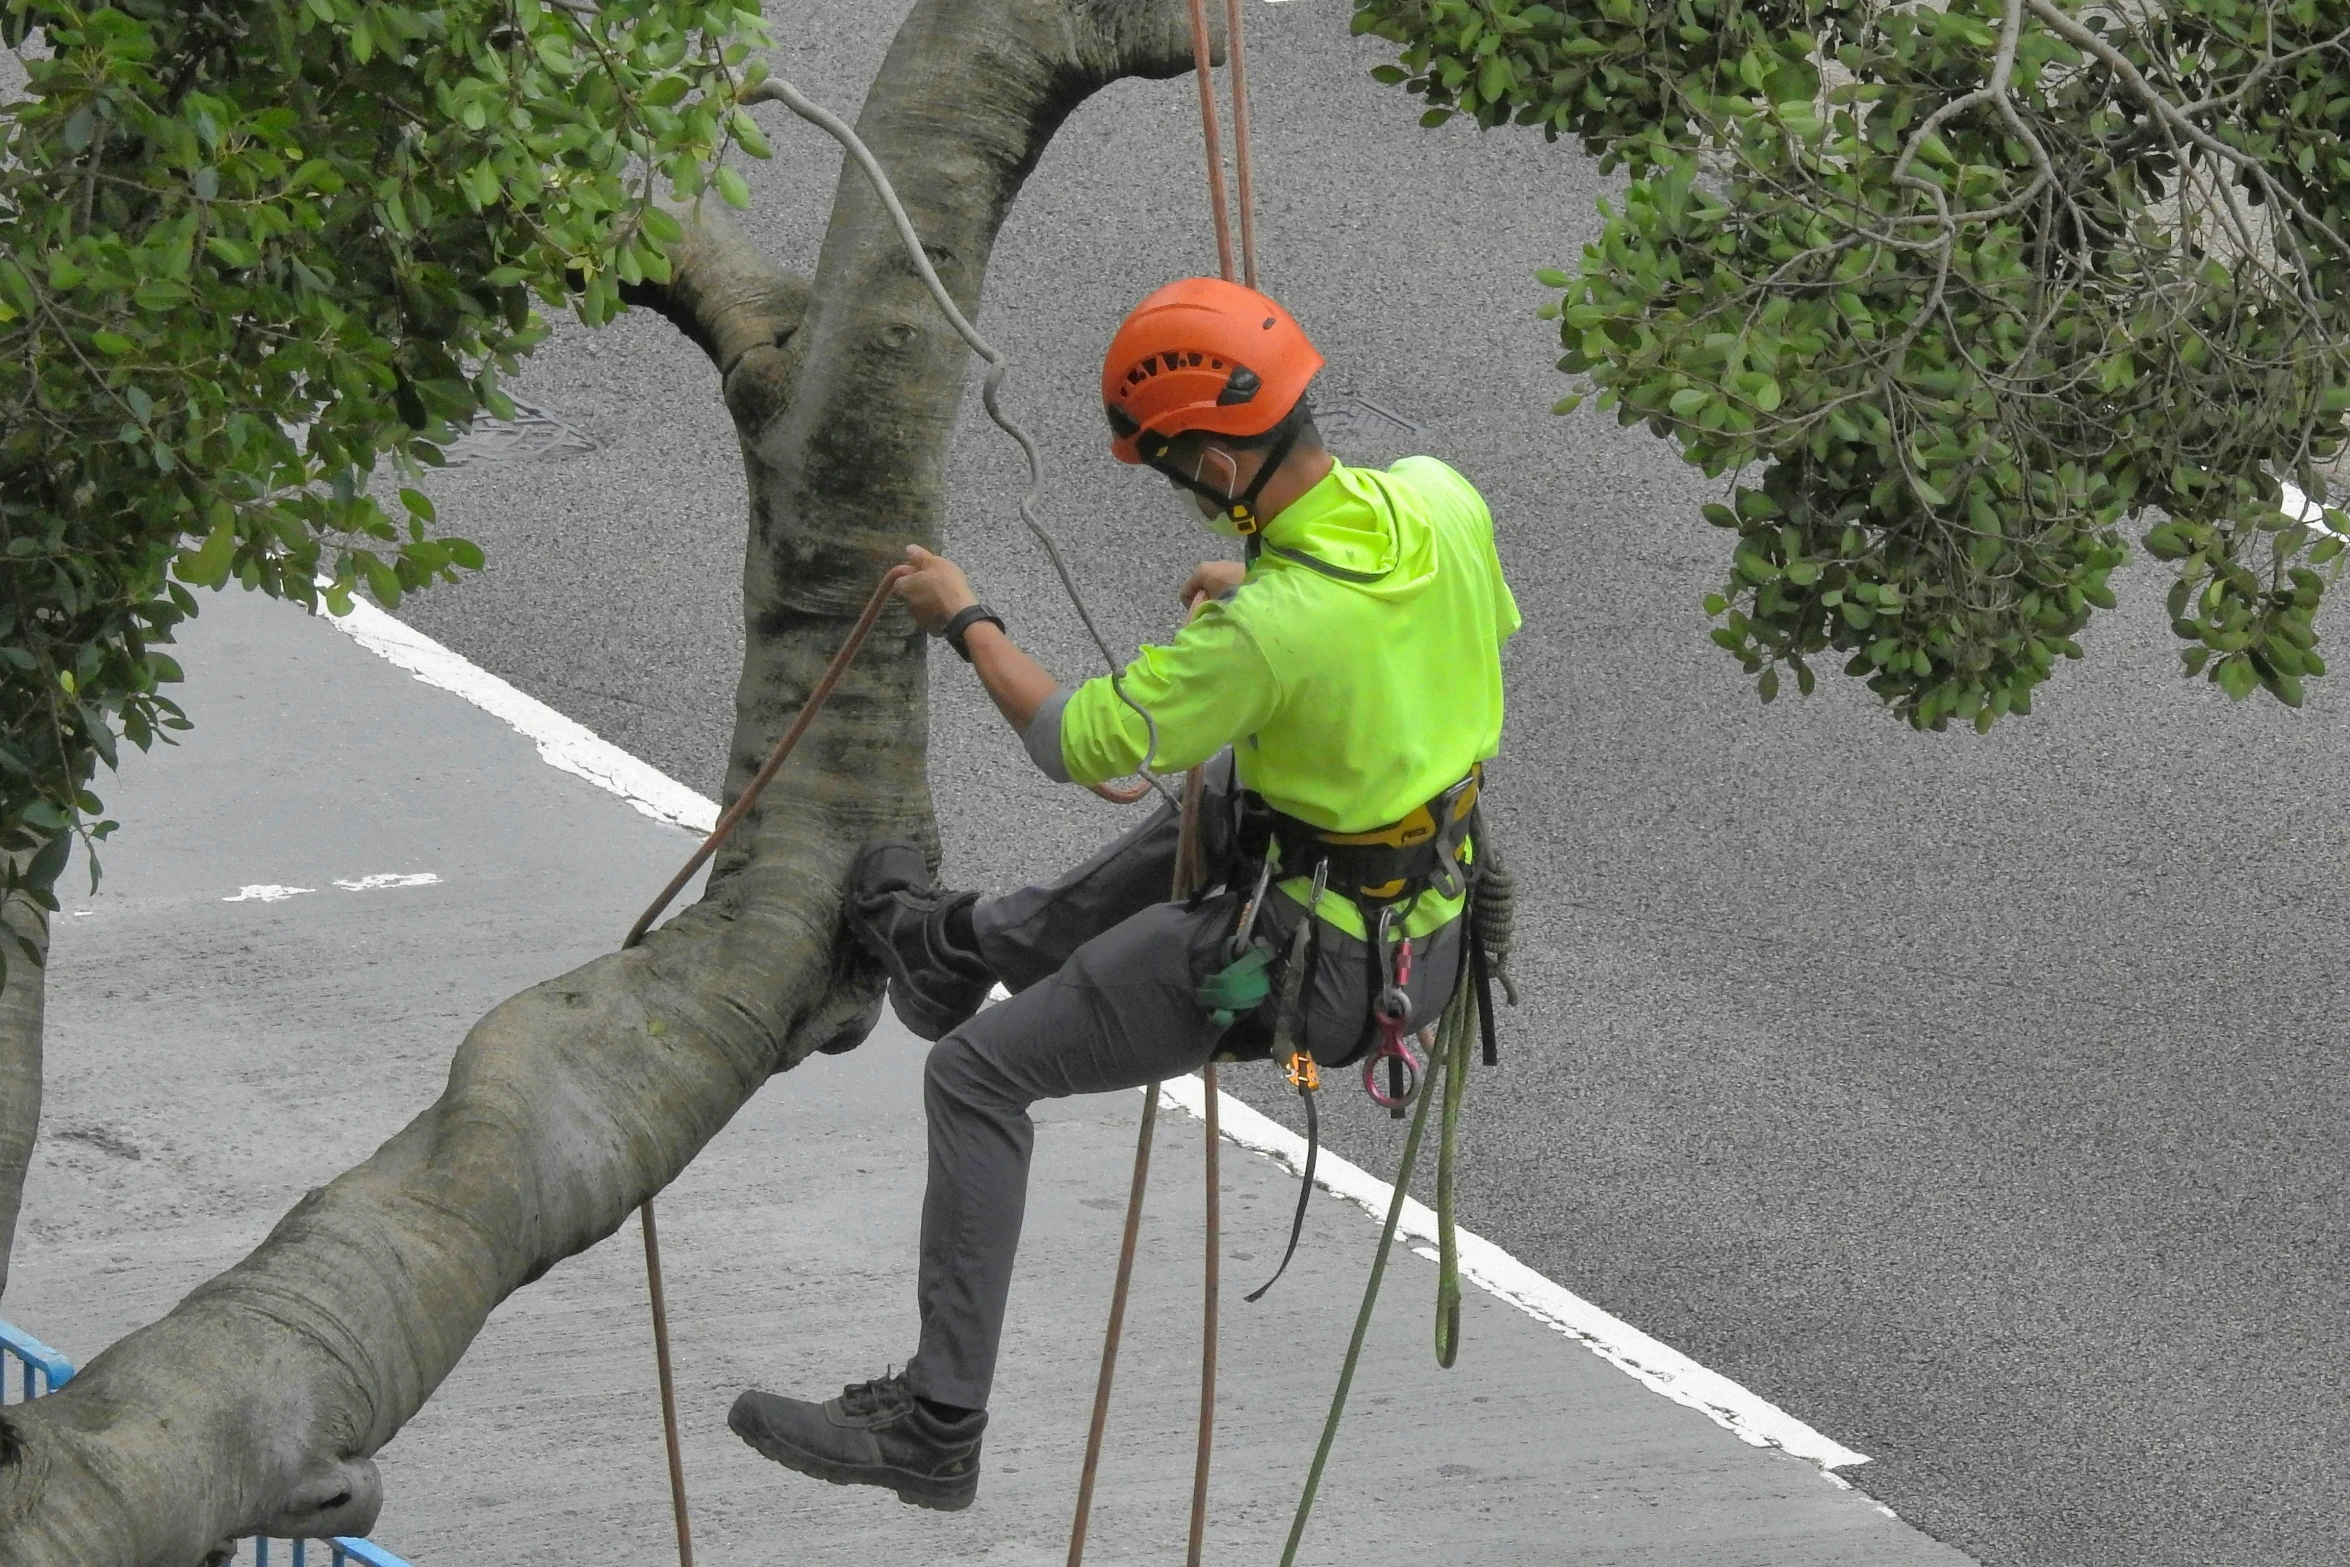 man wearing safety gear on a rope while climbing a tree